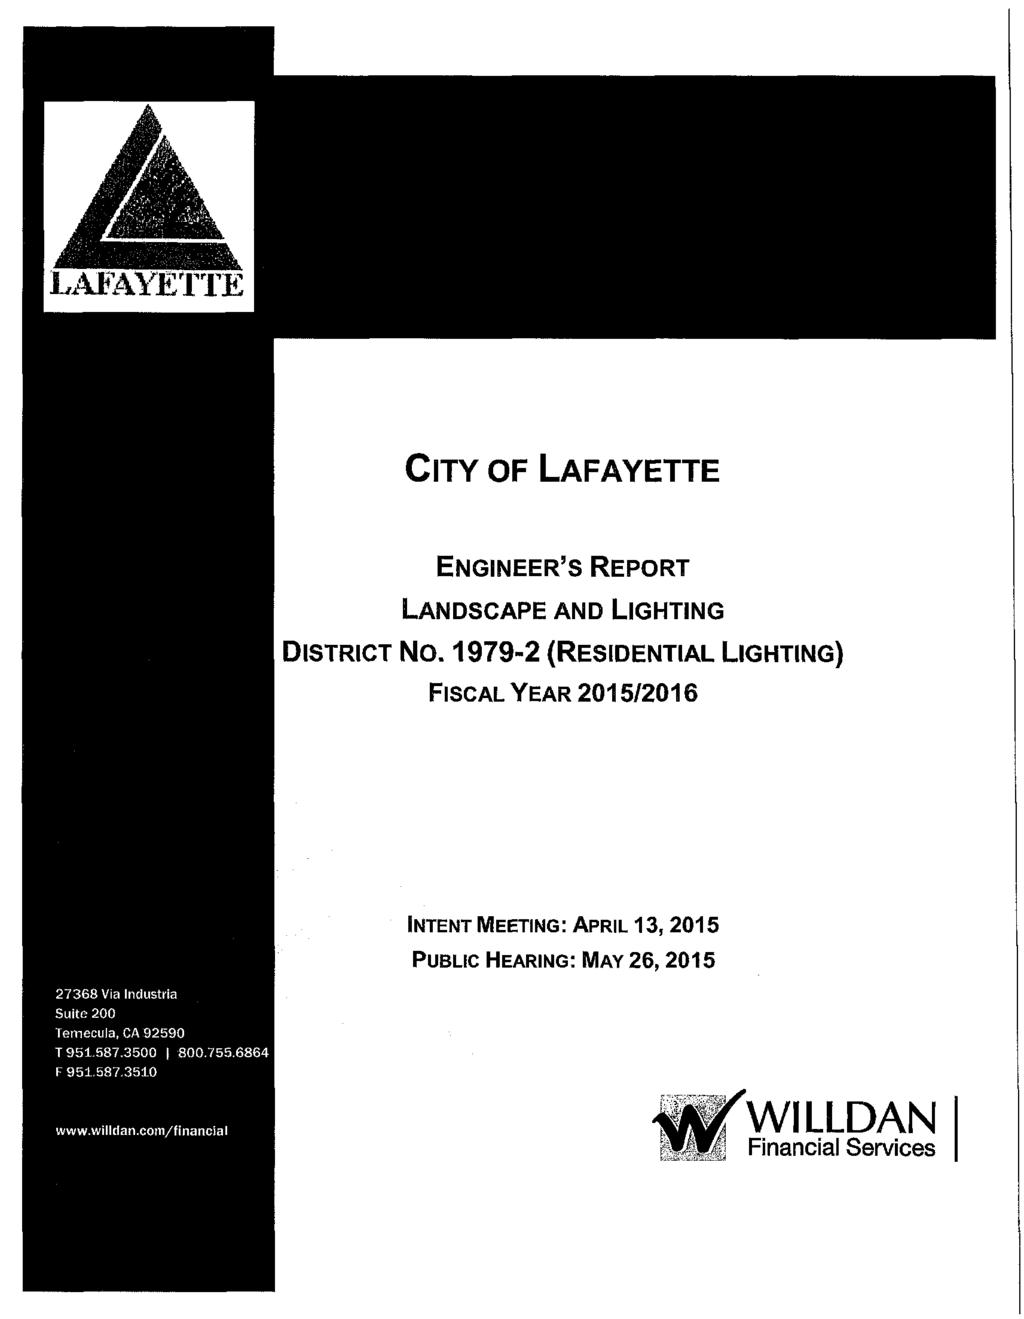 CITY OF LAFAYETTE ENGINEER'S REPORT LANDSCAPE AND LIGHTING DISTRICT NO, 1979-2 (RESIDENTIAL LIGHTING) FISCAL YEAR 2015/2016 INTENT MEETING: APRIL 13,2015 PUBLIC HEARING: